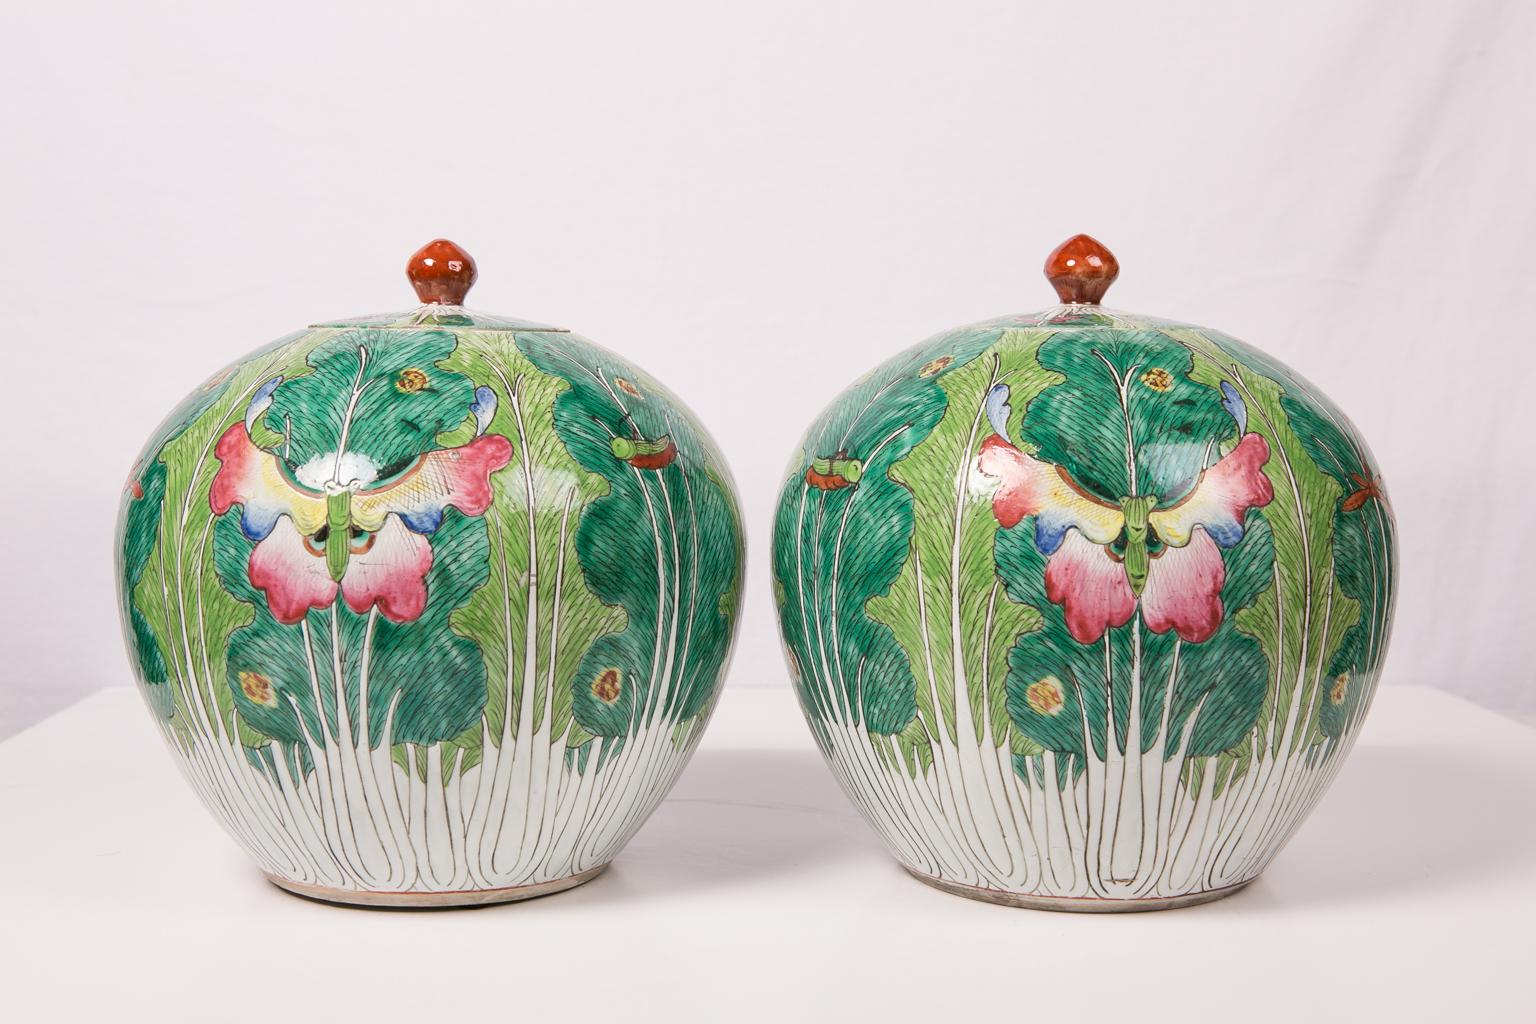 WHY WE LOVE IT: Who doesn't love pink and green?
We are pleased to offer this pair of Chinese ginger jars with cabbage decoration dated to the Xianfeng reign of the Qing dynasty (1831-1860). The jars are vividly decorated with cabbage leaves in